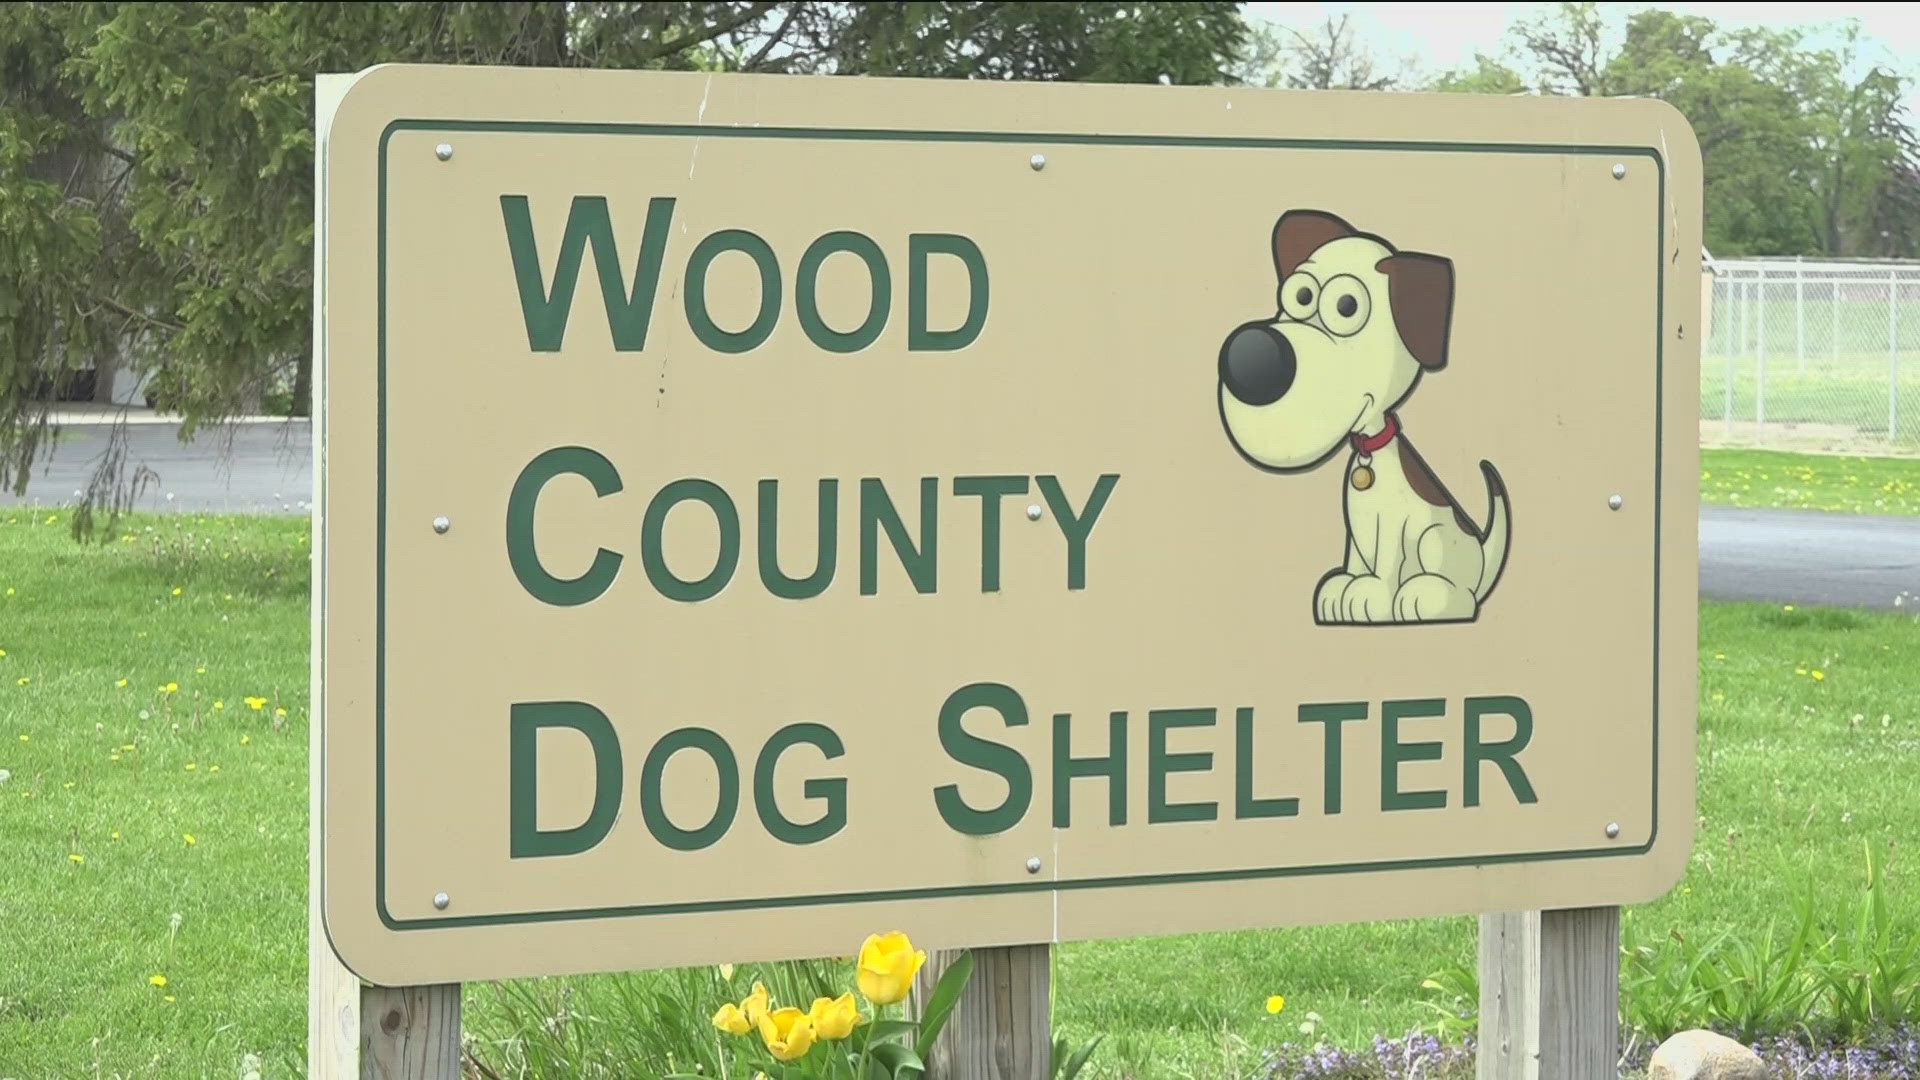 Dog adoptions will cost $25 during the promotion instead of the standard $75.